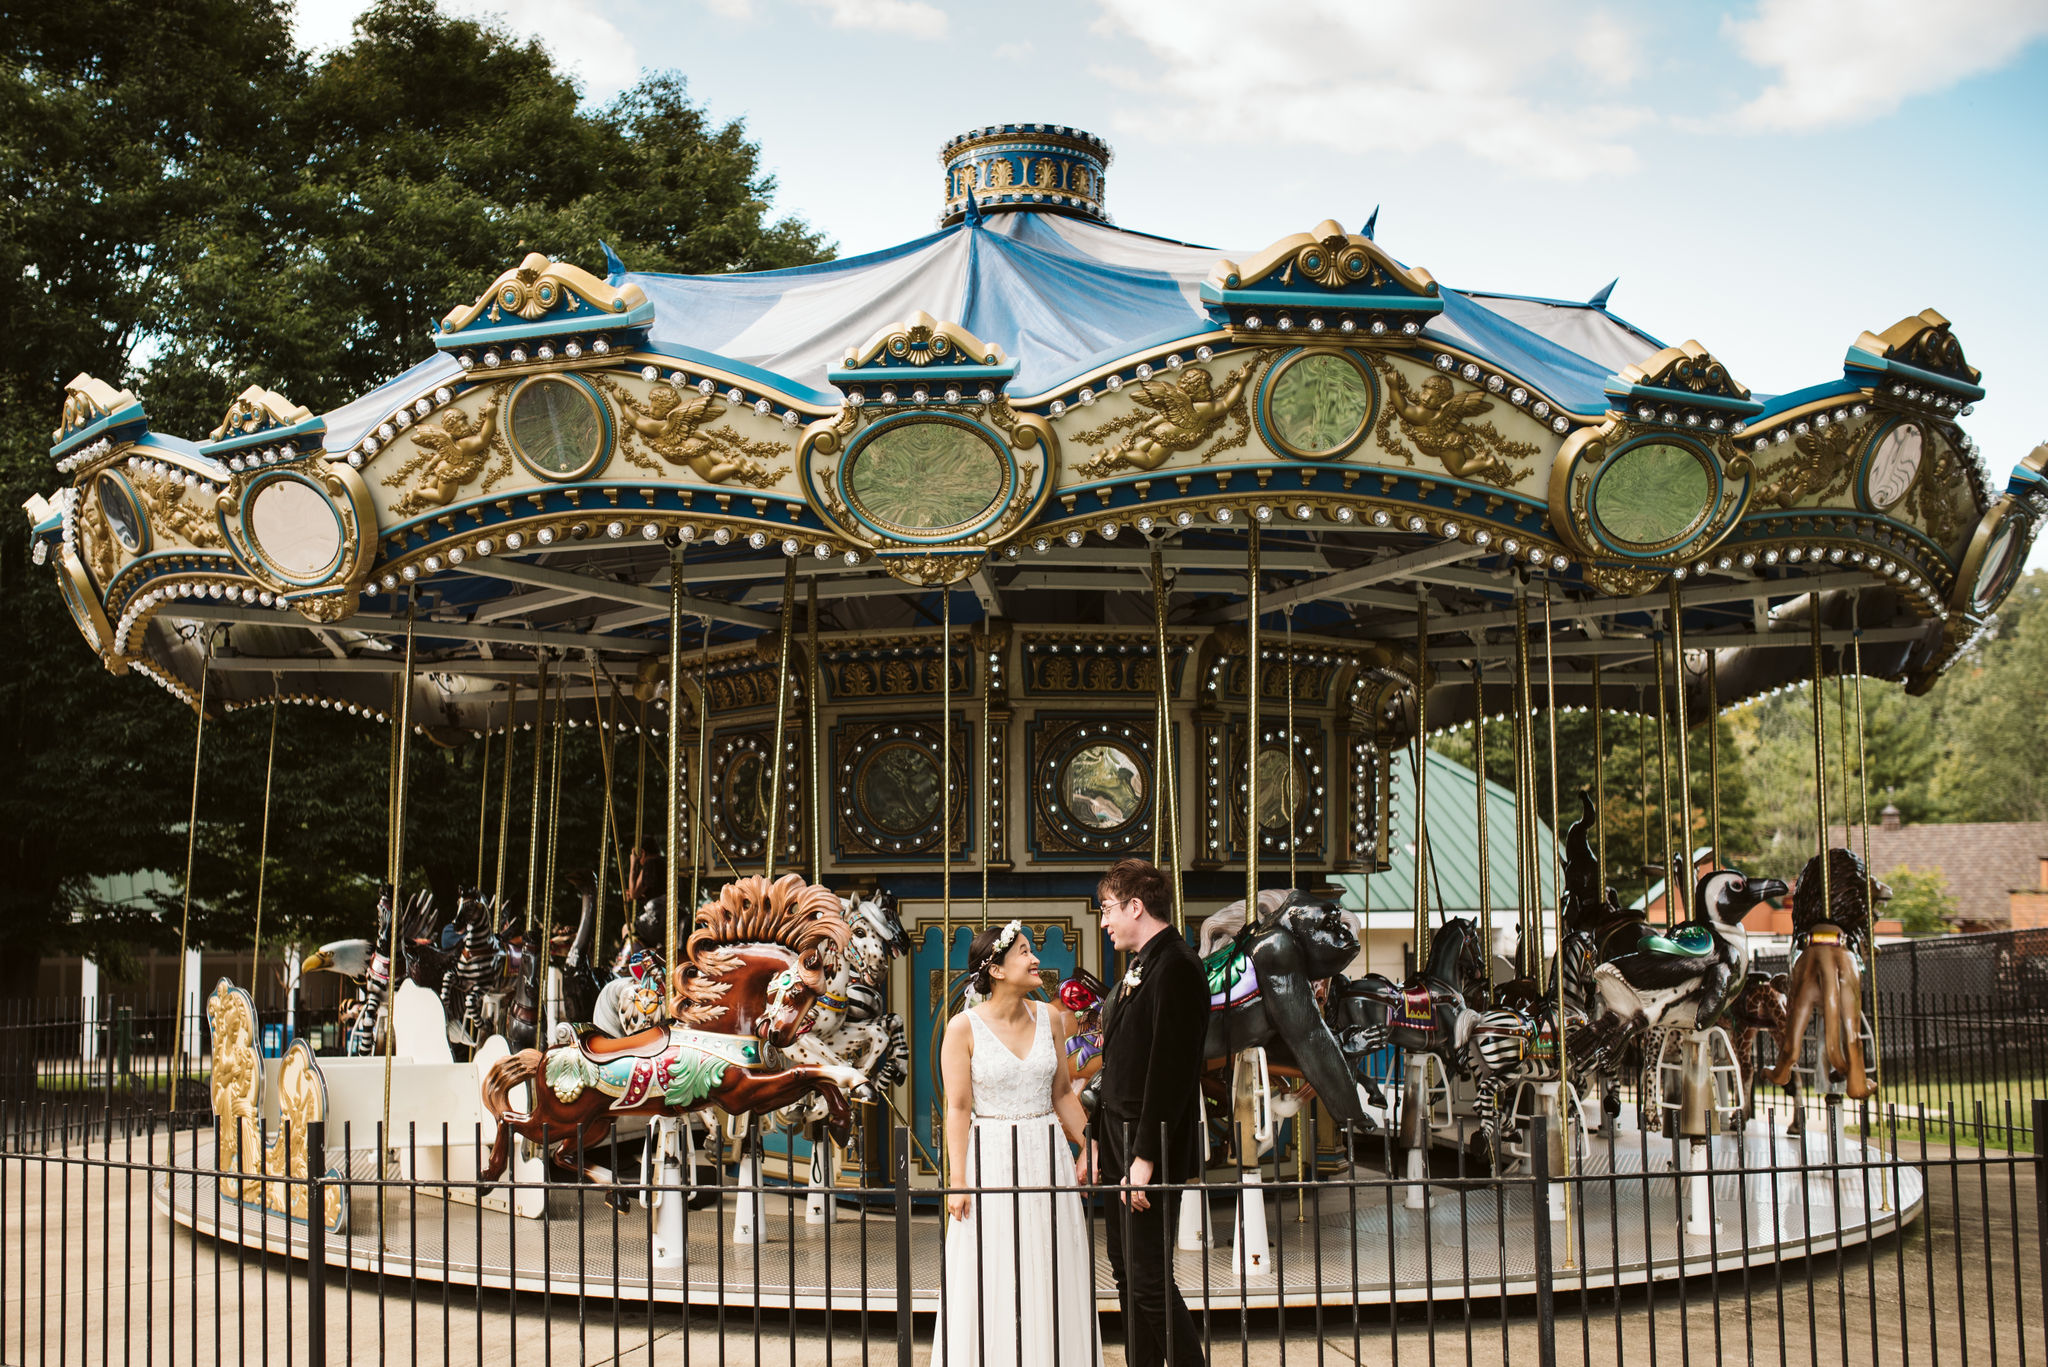  Baltimore, Maryland Wedding Photographer, The Mansion House at the Maryland Zoo, Relaxed, Romantic, Laid Back, Bride and Groom Standing in front of Vintage Carousel 